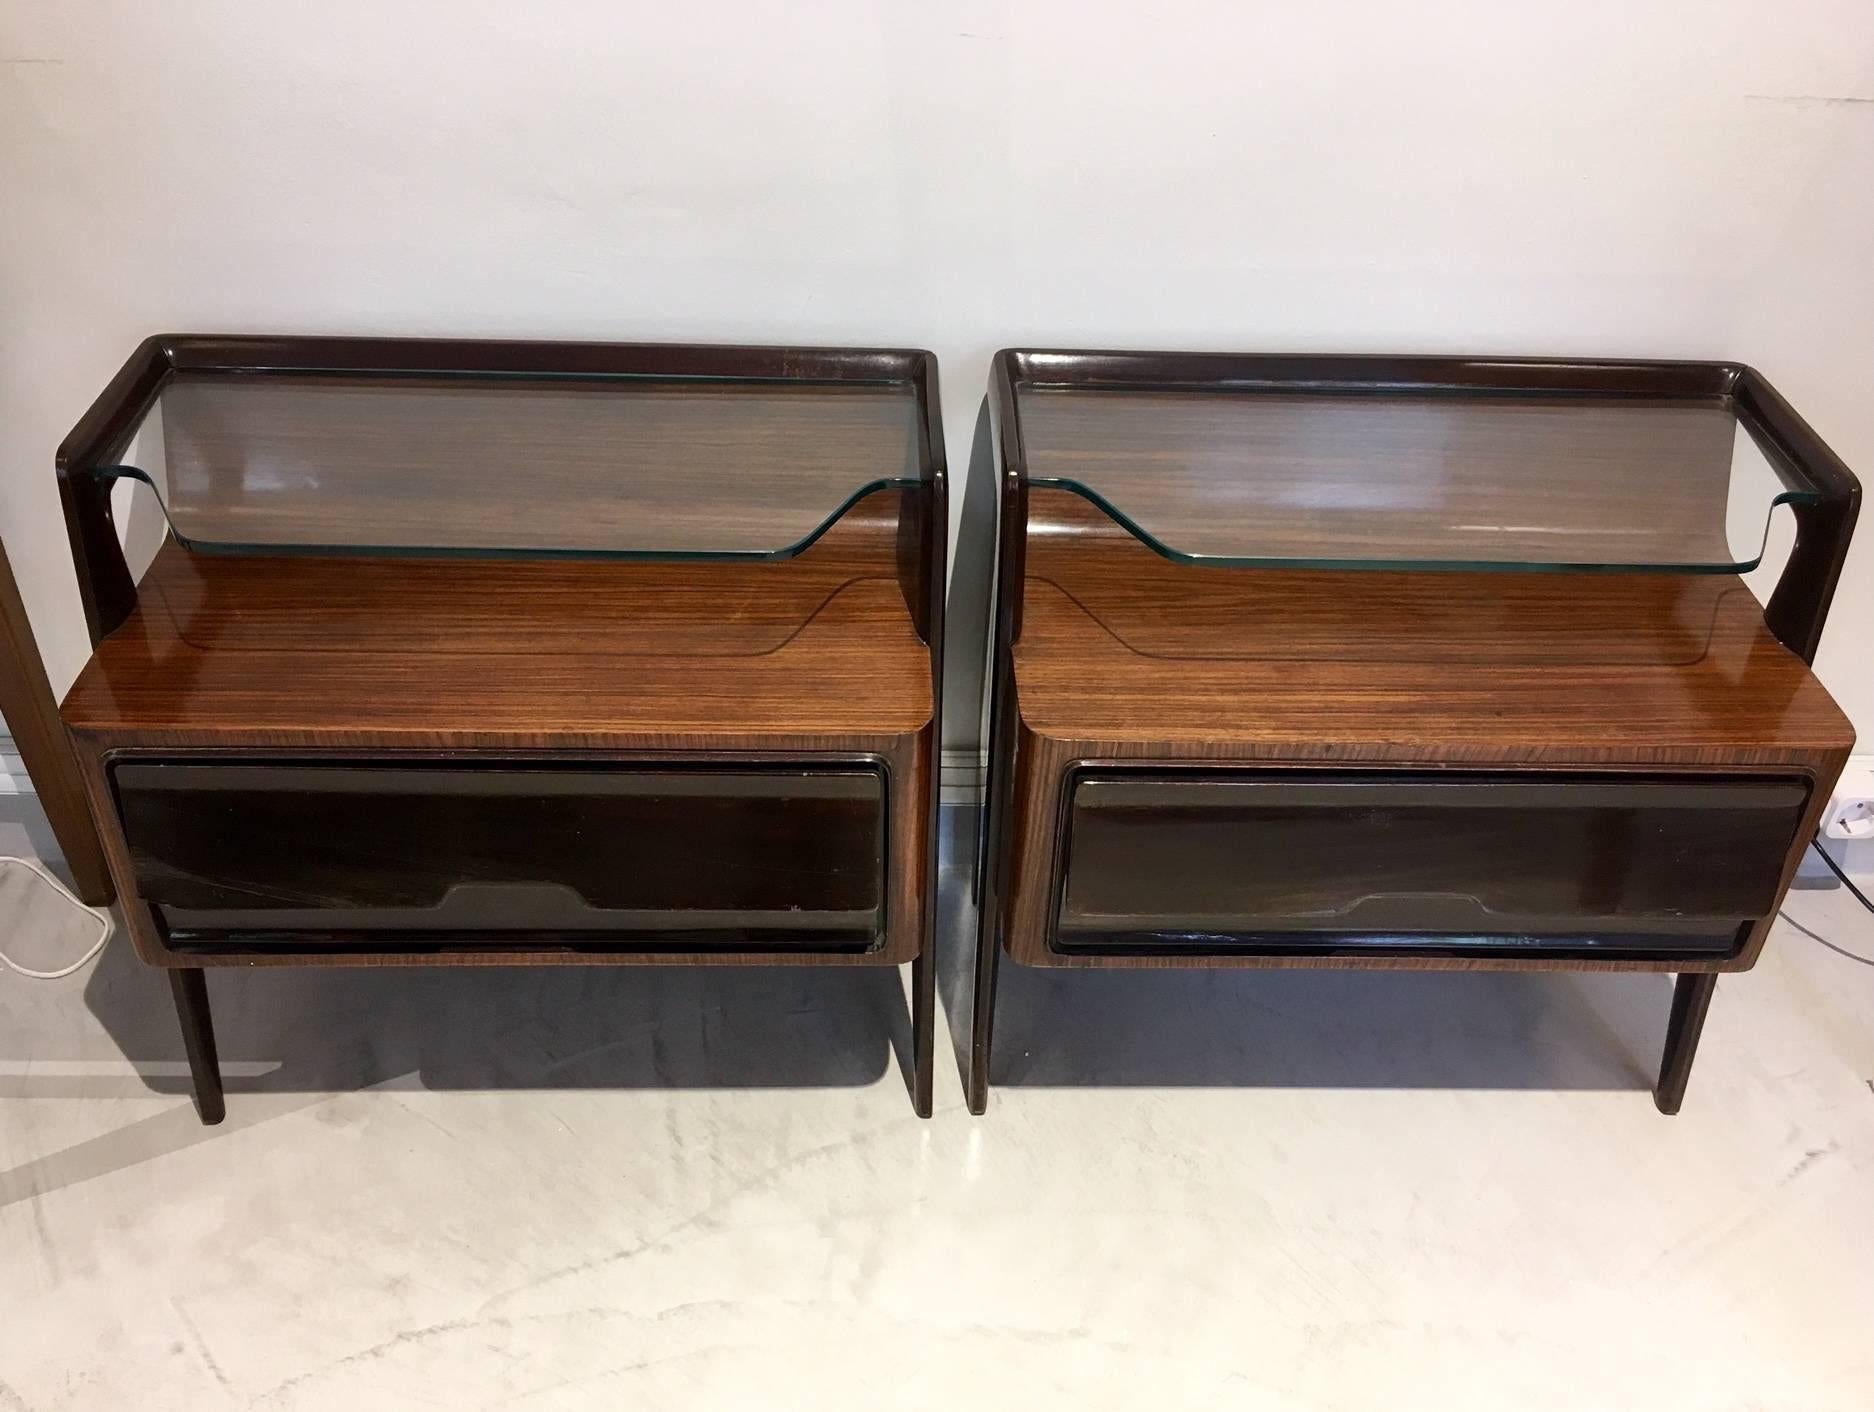 Pair of bedside tables attributed to Paolo Buffa (1903-1970), Italy, circa 1950. Wood lacquered and lined with kingwood, top and shelf in glass. Drop-down doors. One nightstand is missing a door hinge. Some age-related wear.